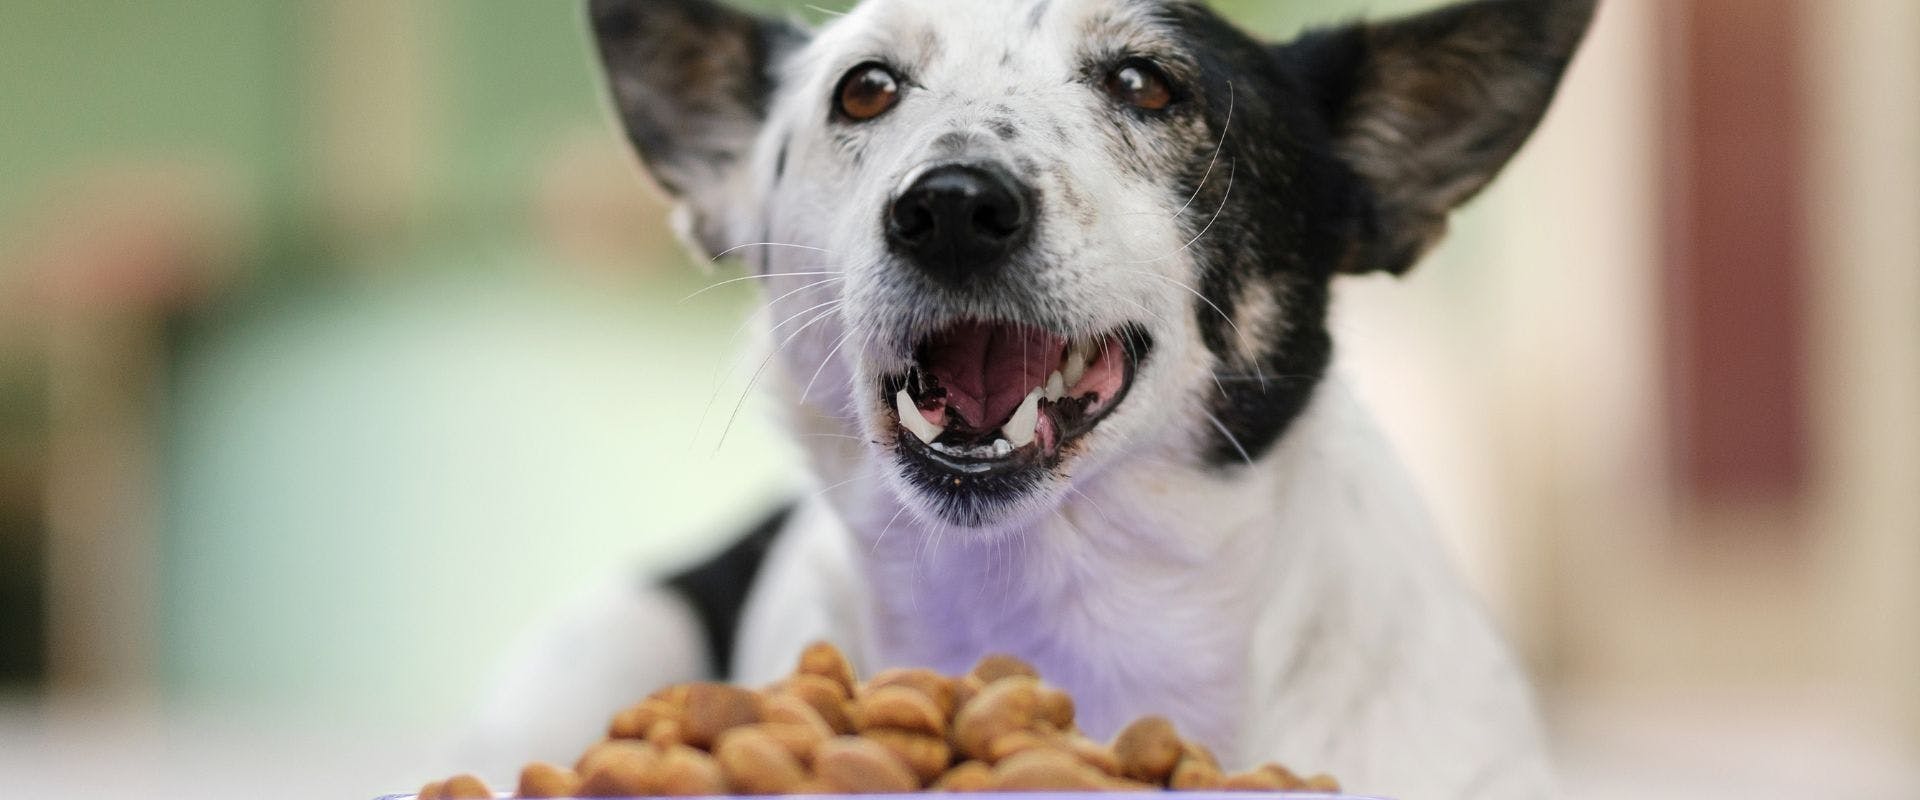 Black and white dog sat behind a bowl of kibble